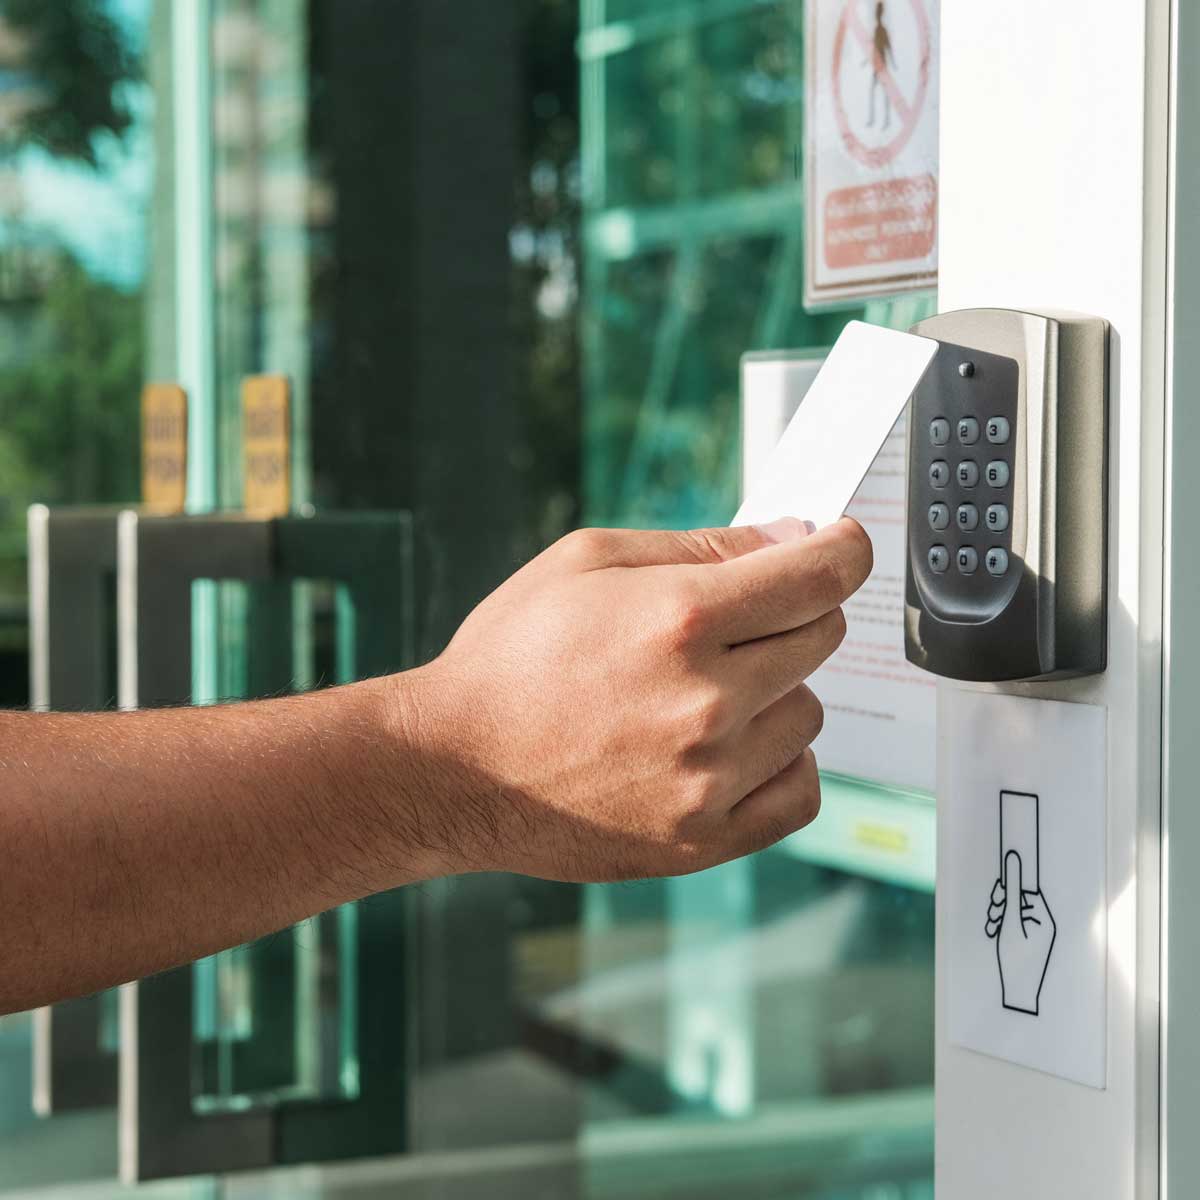 Hand-using-security-key-card-scanning-to-open-the-door-to-entering-private-building.-Home-and-building-security-system